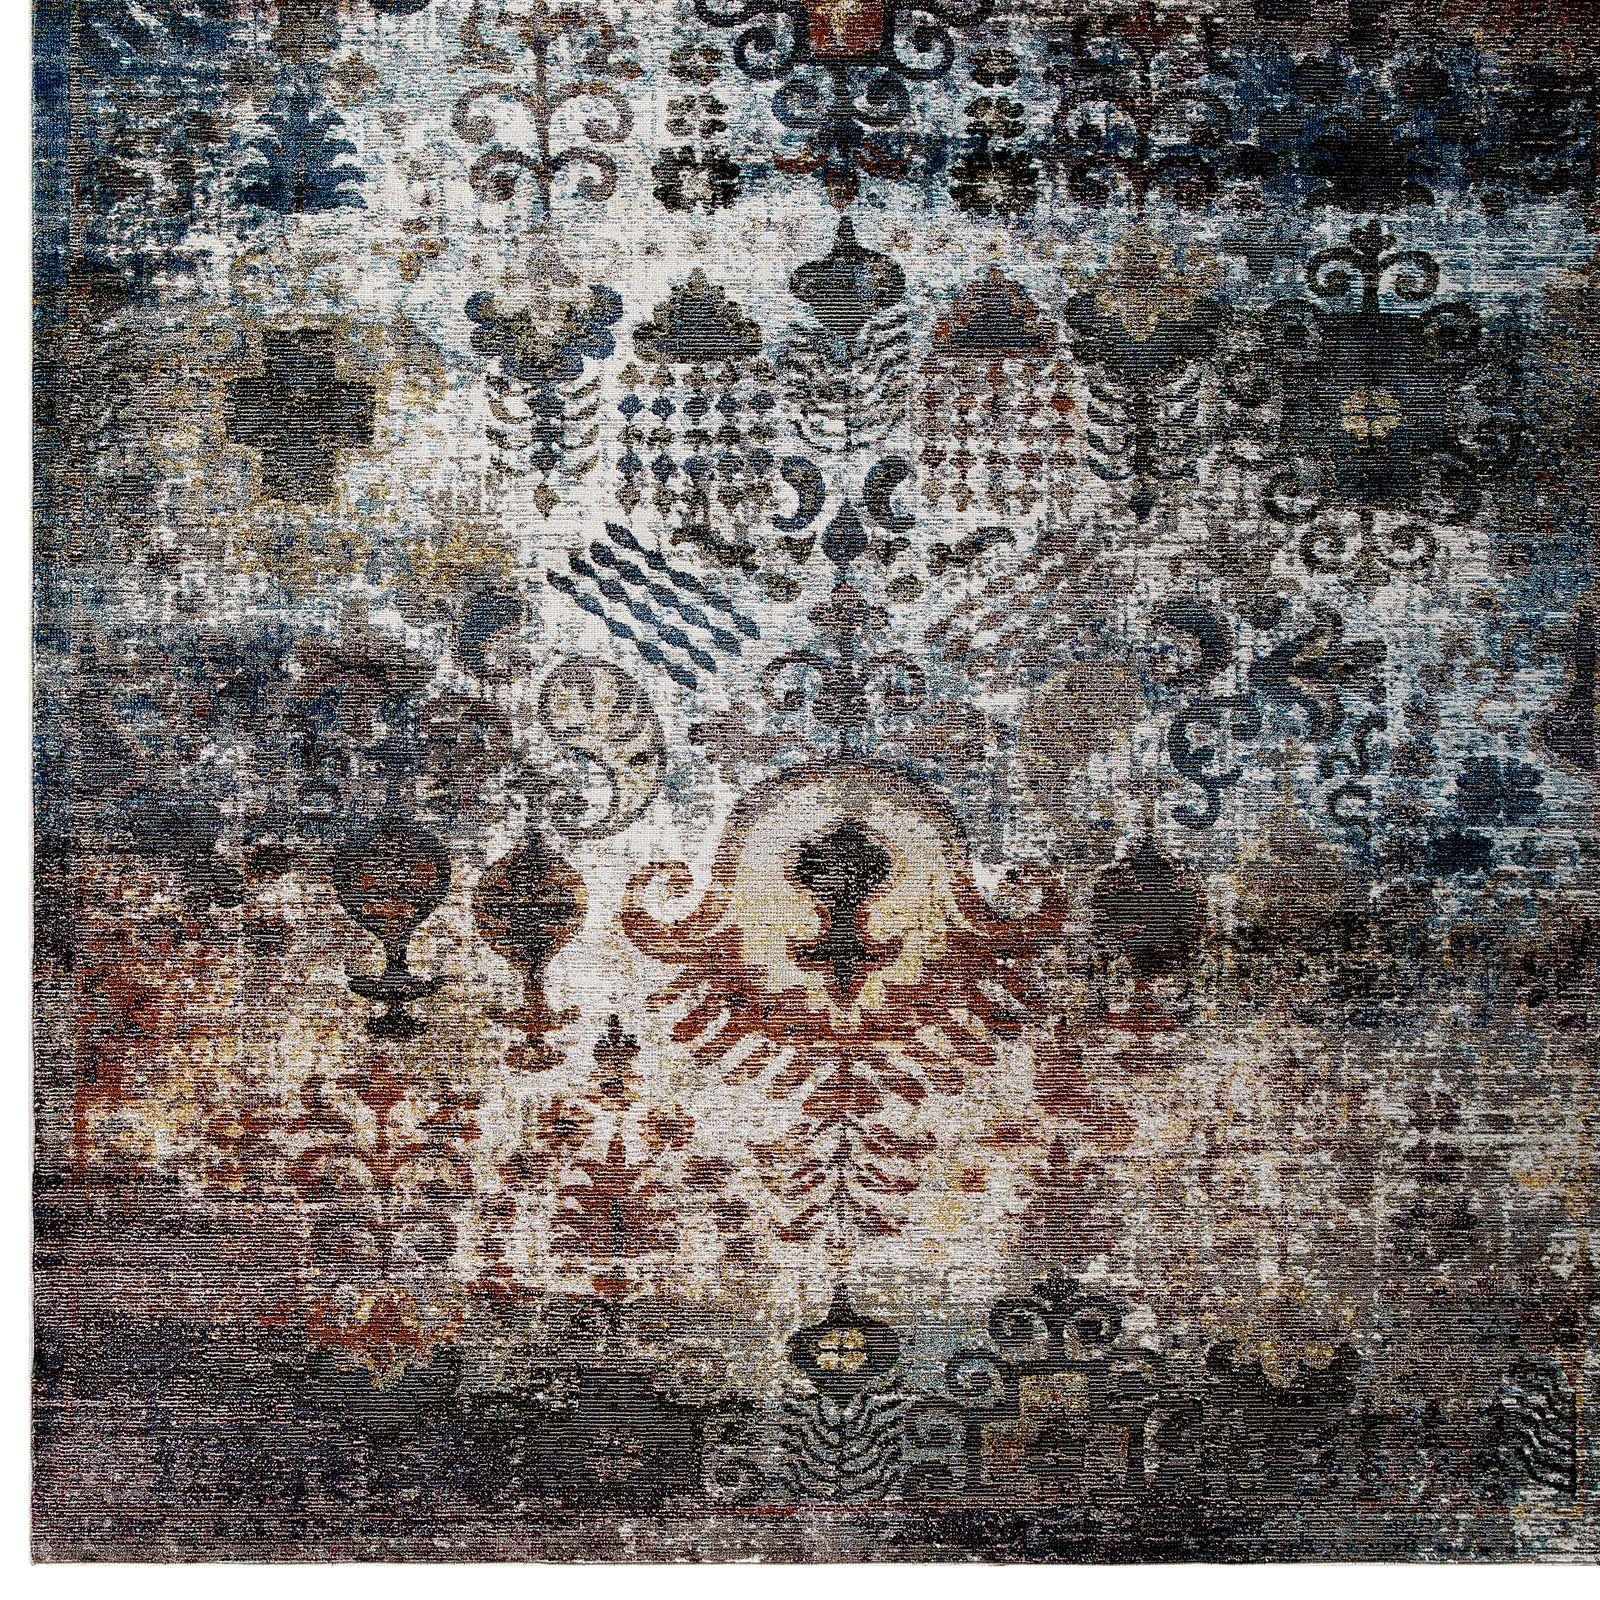 Success Tahira Transitional Distressed Vintage Floral Moroccan Trellis 4x6 Area Rug - East Shore Modern Home Furnishings